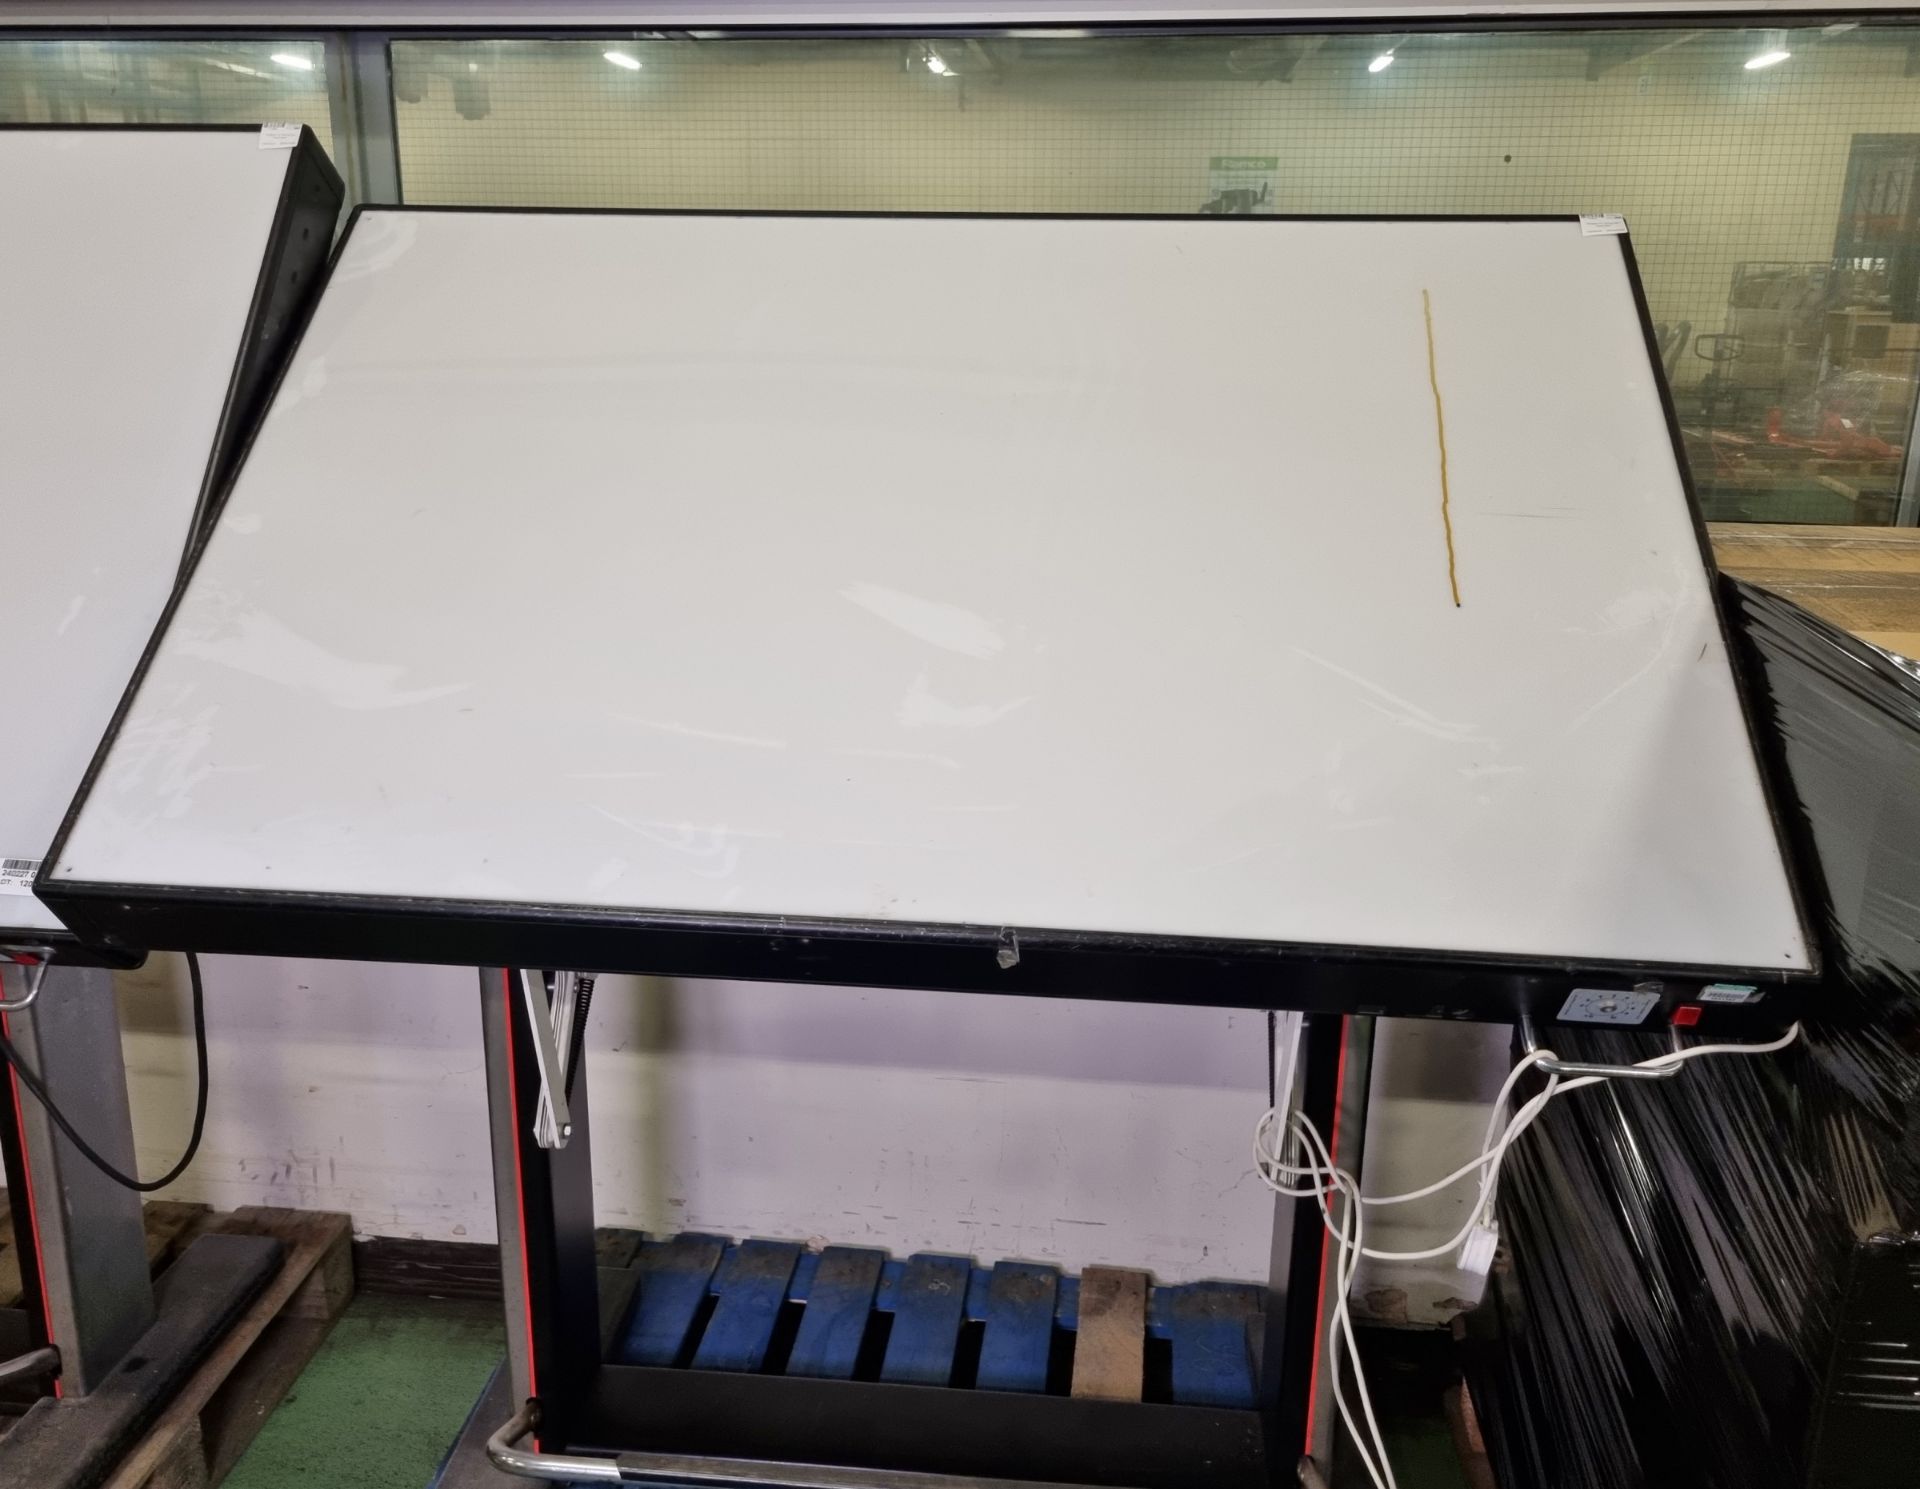 2x Portable 74 inch folding light board tables - Image 3 of 6